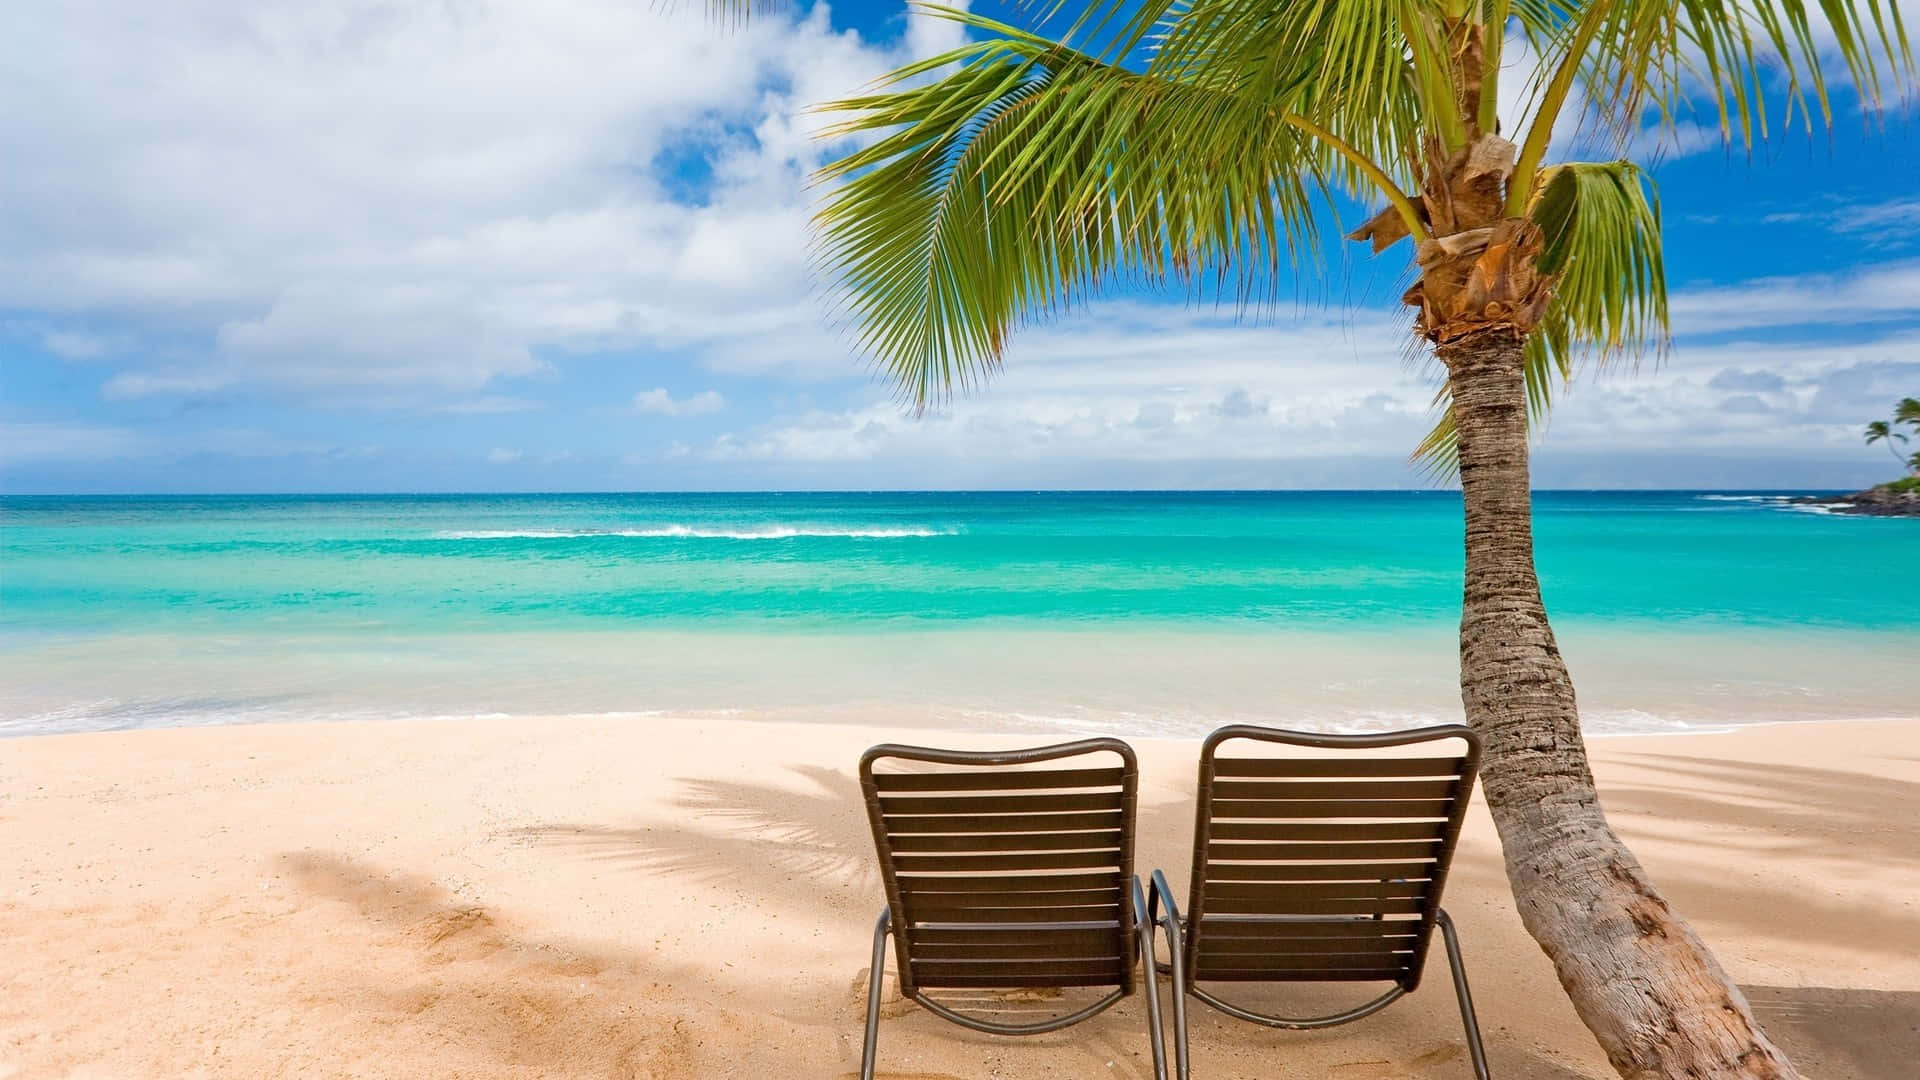 Two Chairs On A Beach Under A Palm Tree